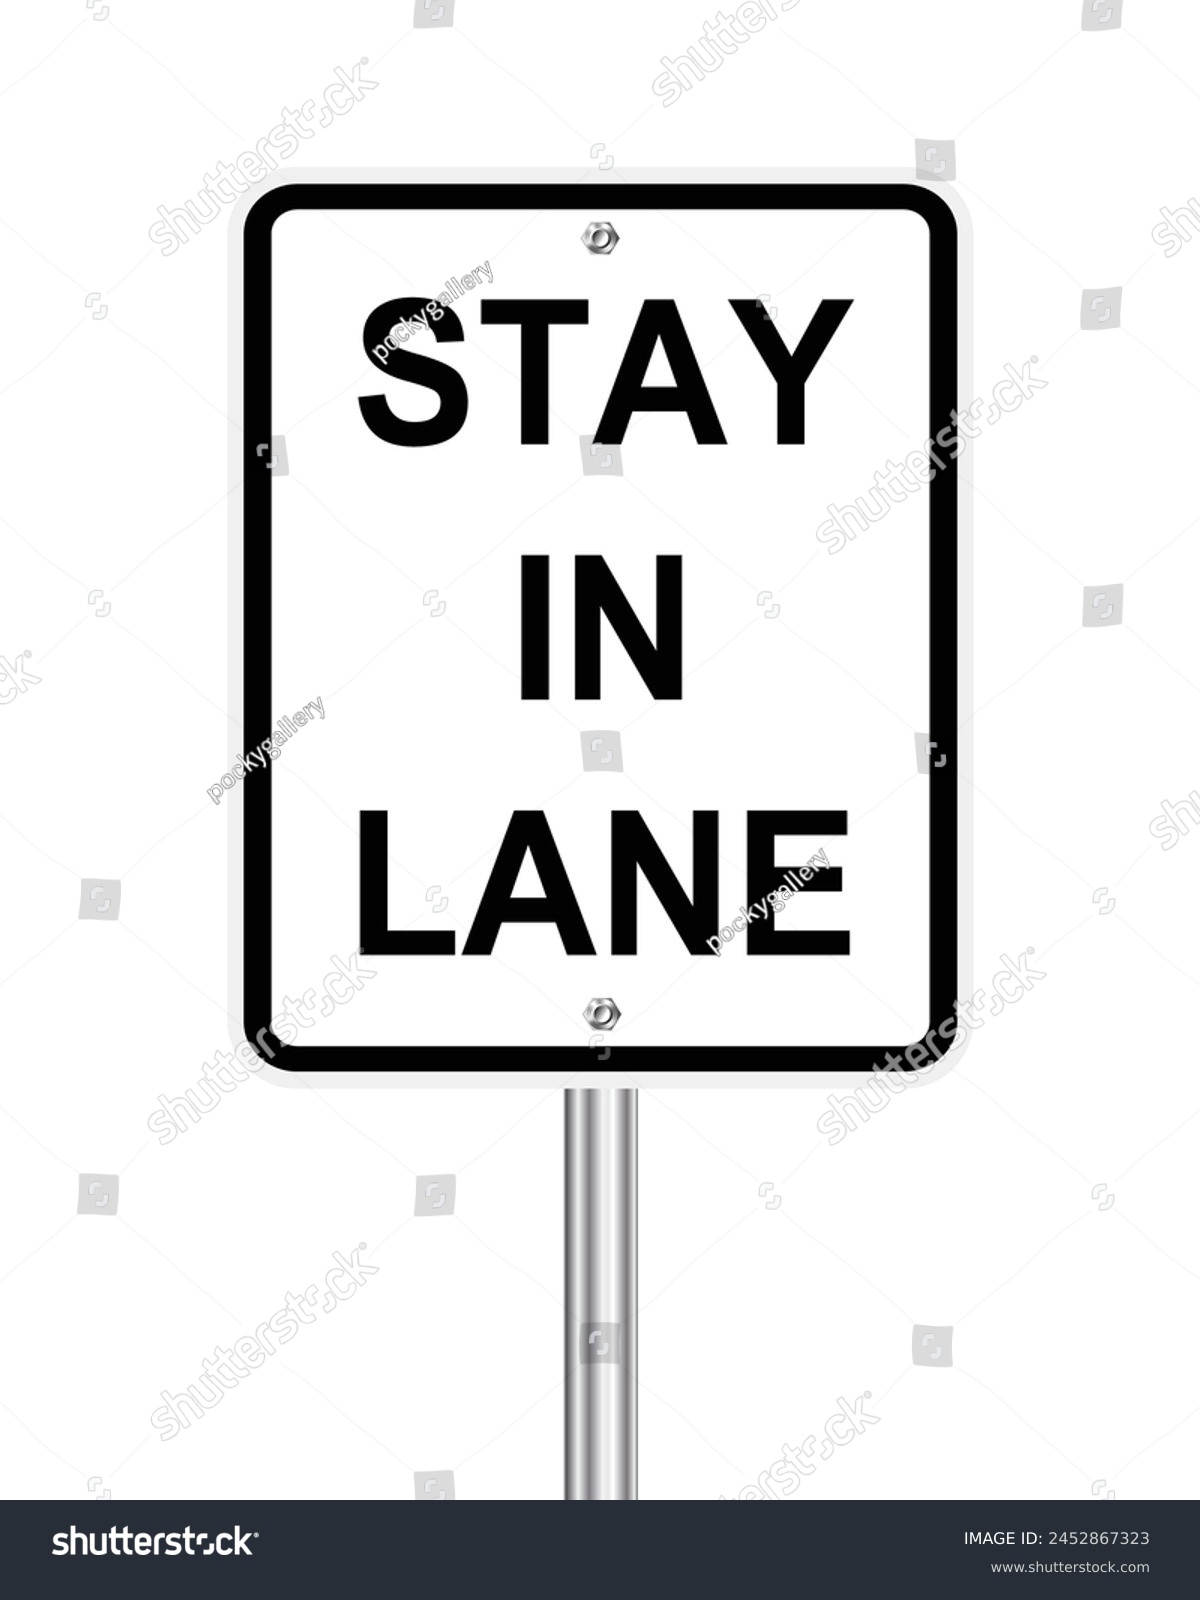 SVG of Stay in lane traffic sign on white background svg